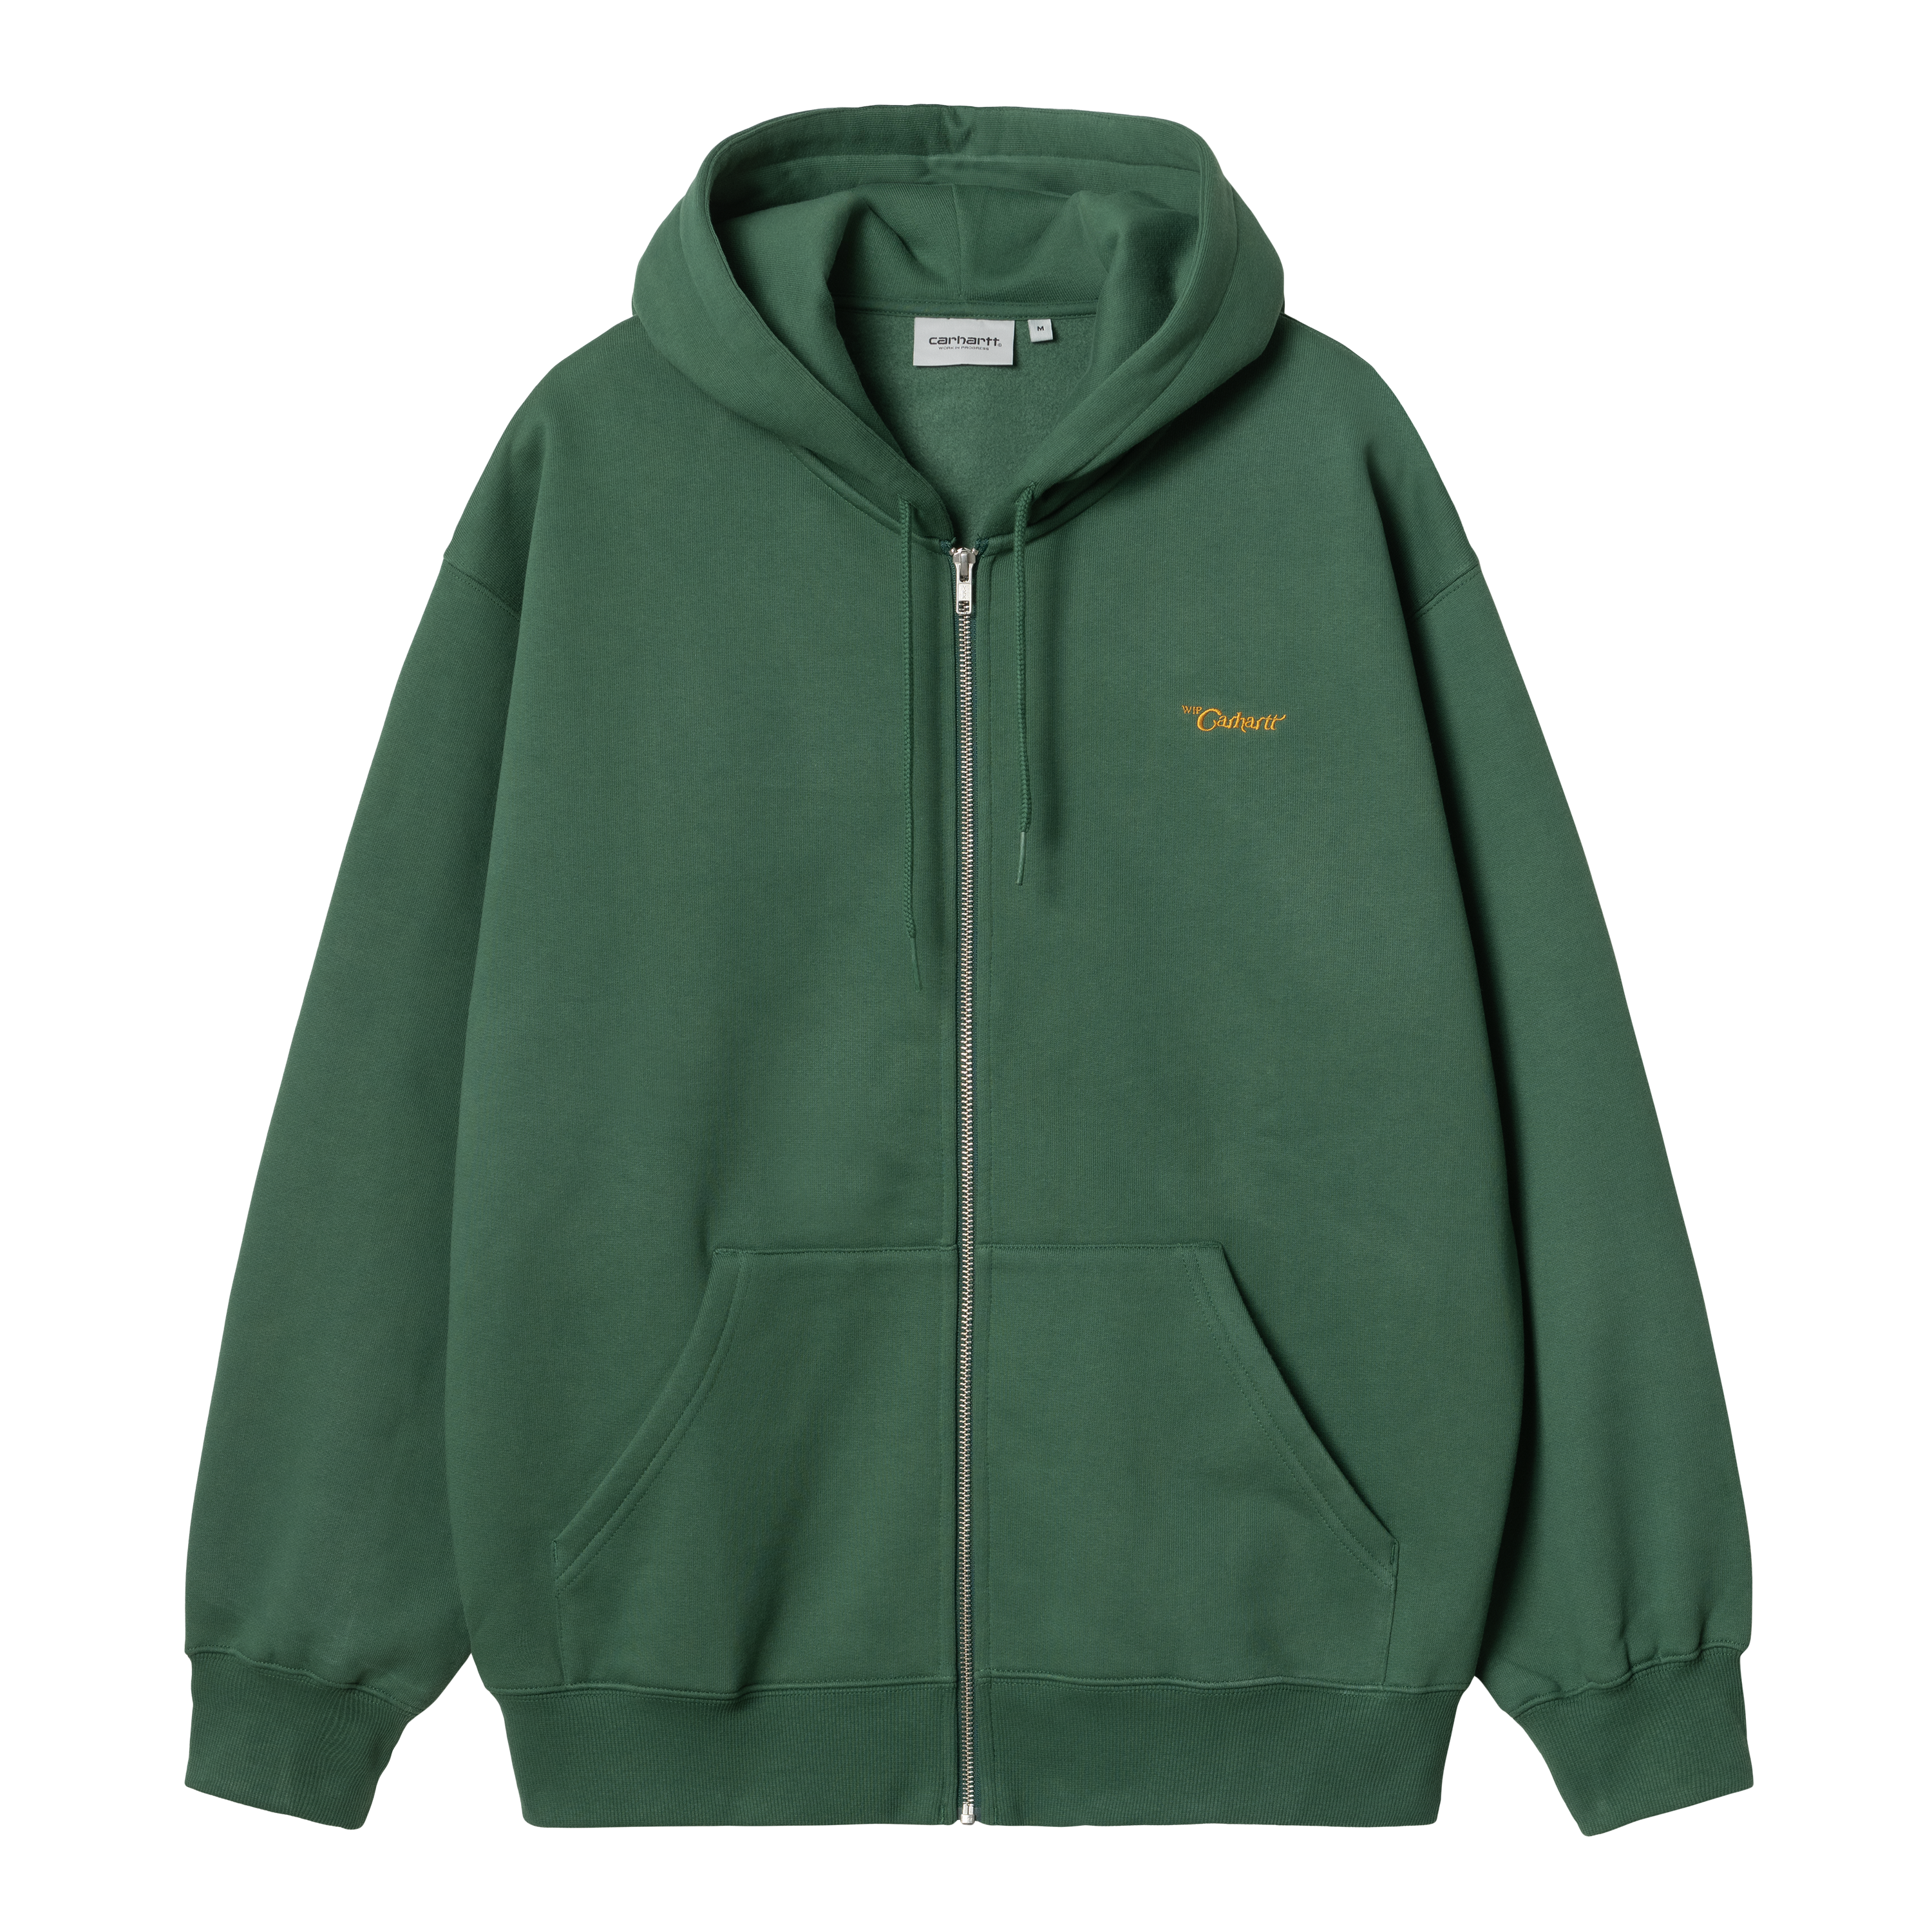 Relaxed Fit Hoodie - Light green - Men